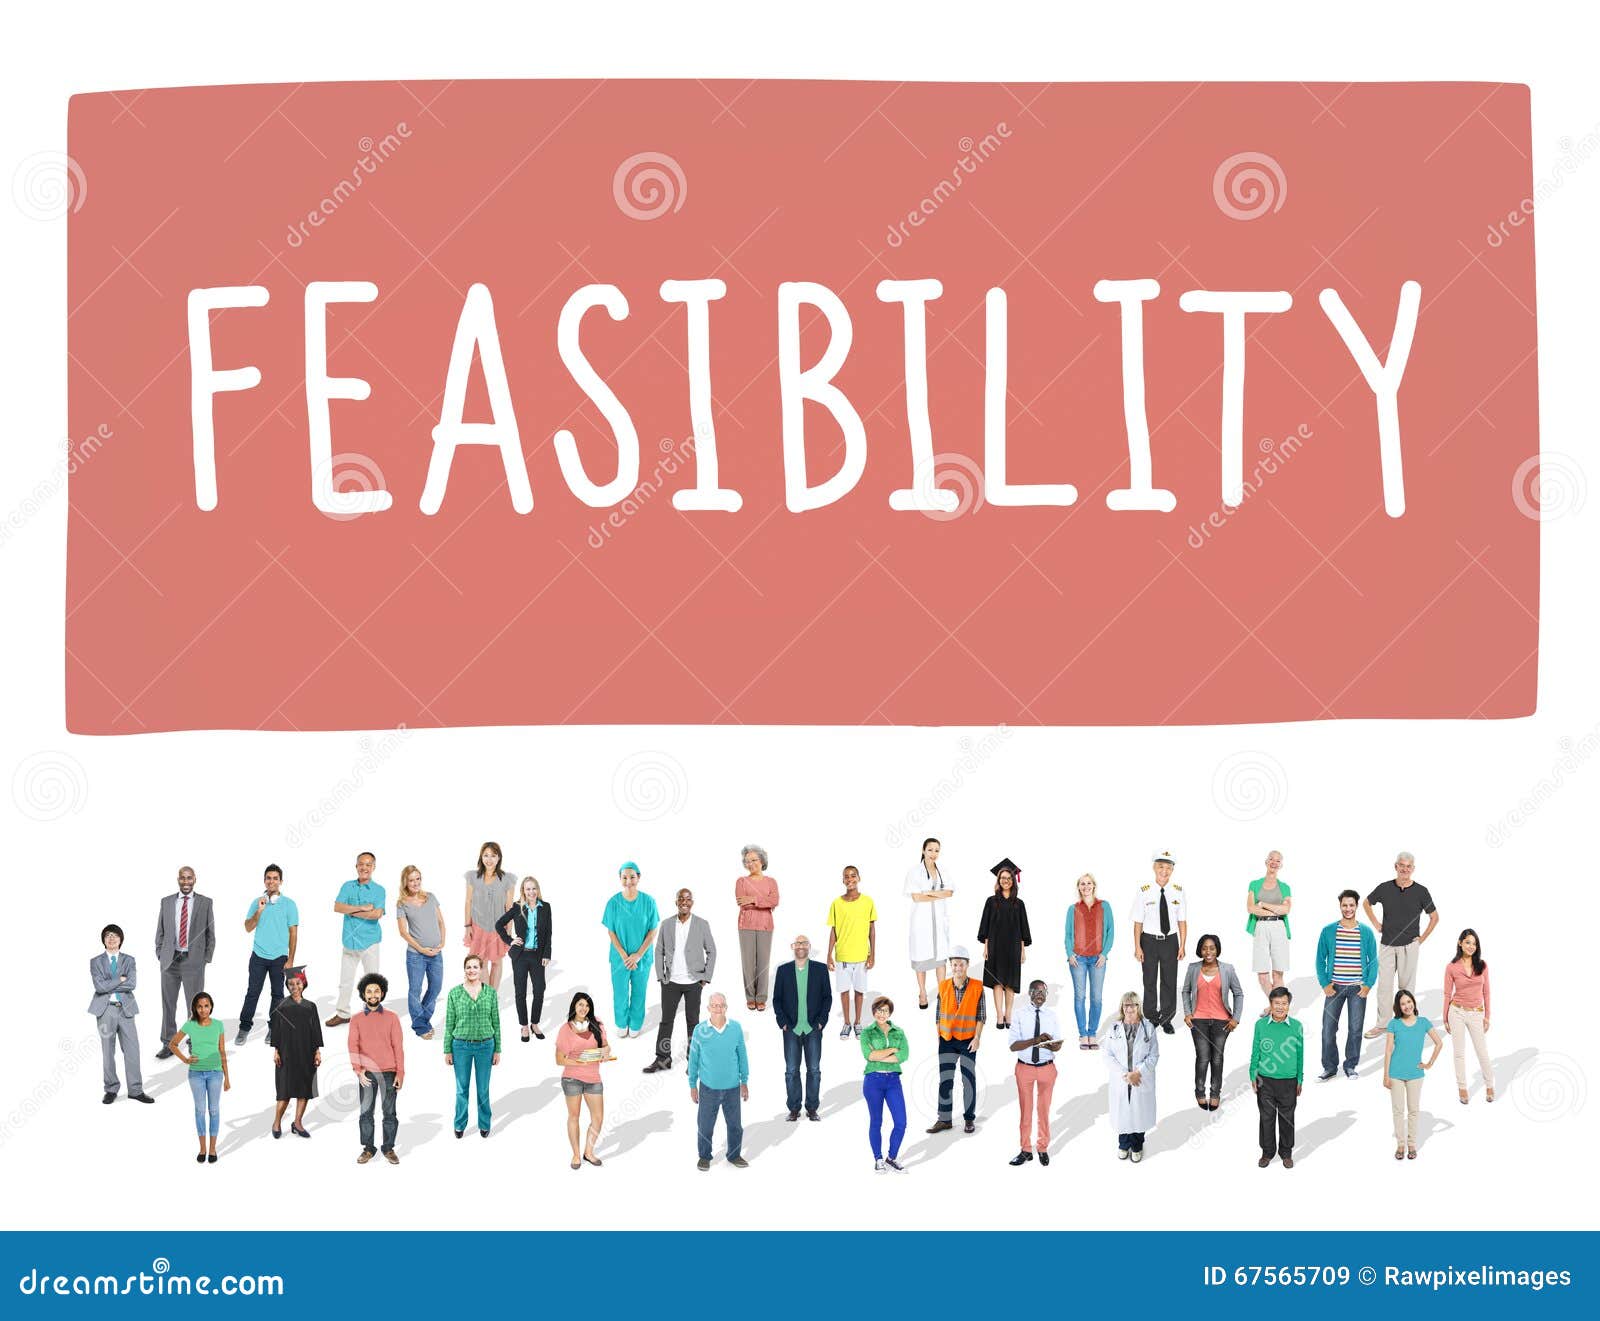 feasibility possibility possible potential ideas concept